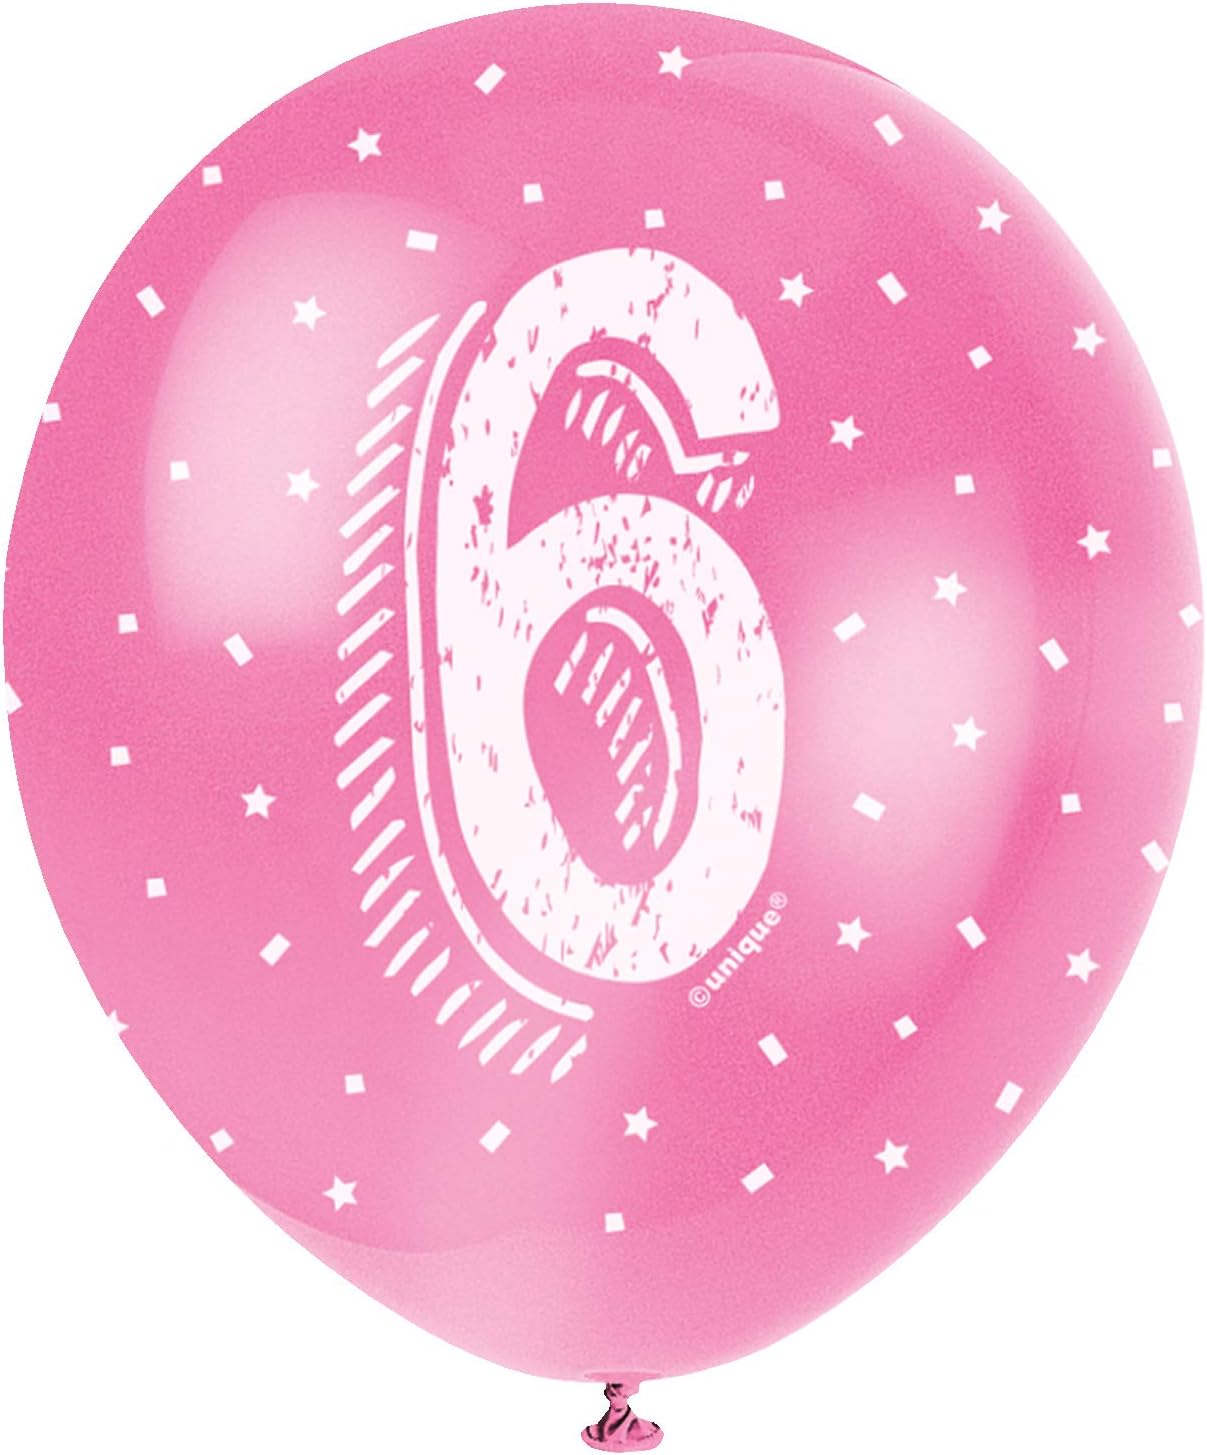 Pack of 5 Number 6 12" Latex Balloons